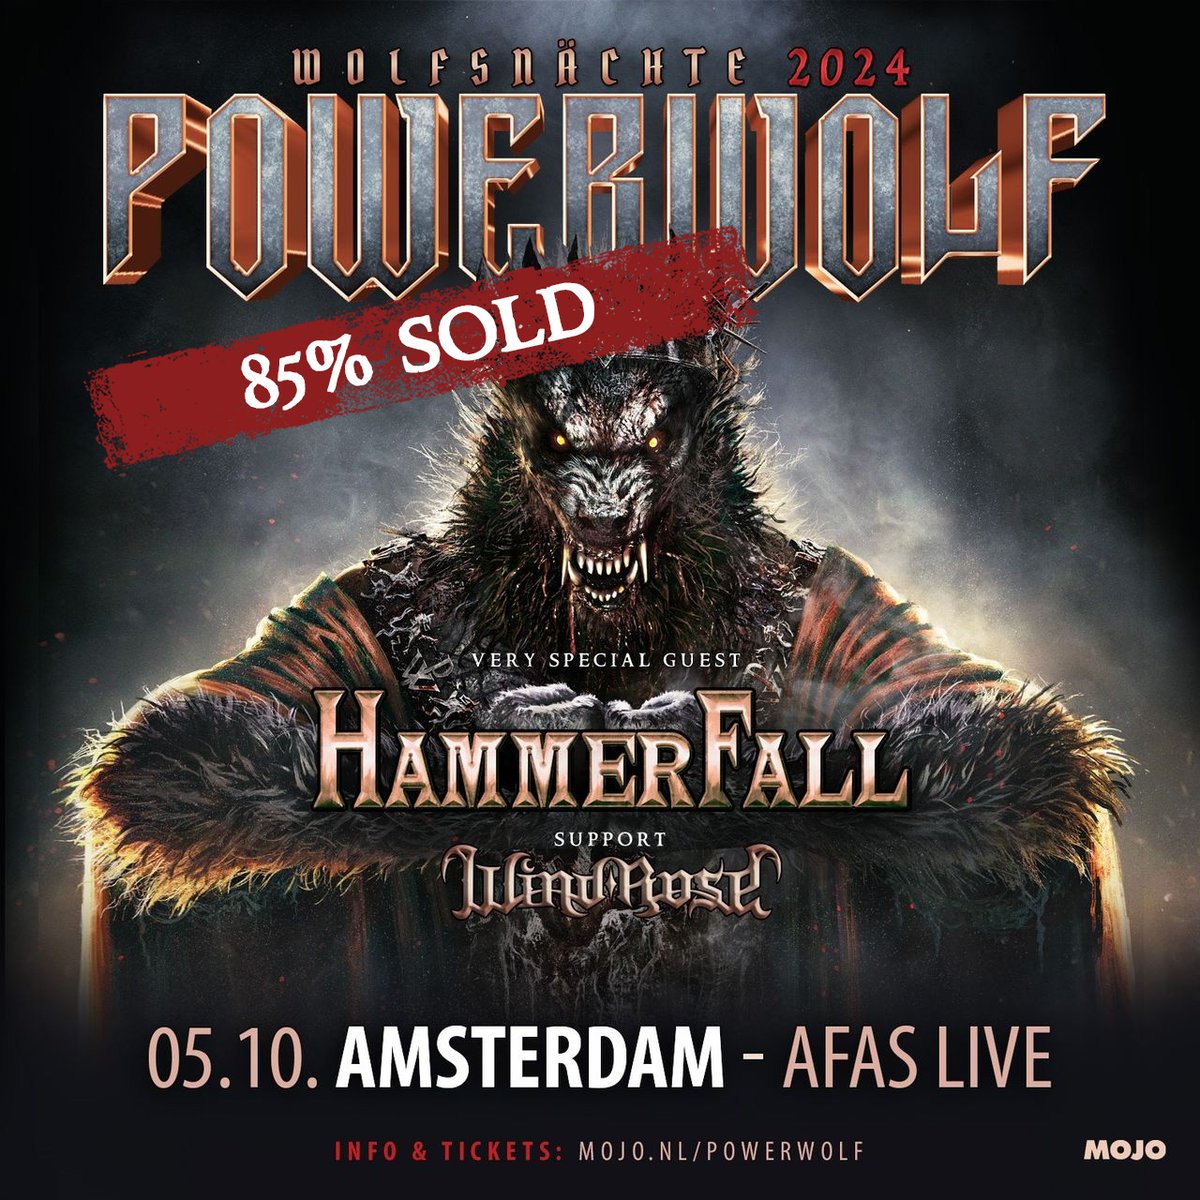 And it doesn't stop! Amsterdam is the next city to announce a Low Ticket Warning for our upcoming Wolfsnächte Tour with Hammerfall and Wind Rose! We can't believe how huge the rush is so many months before the tour, this will be by far the biggest Powerwolf tour ever! #powerwolf